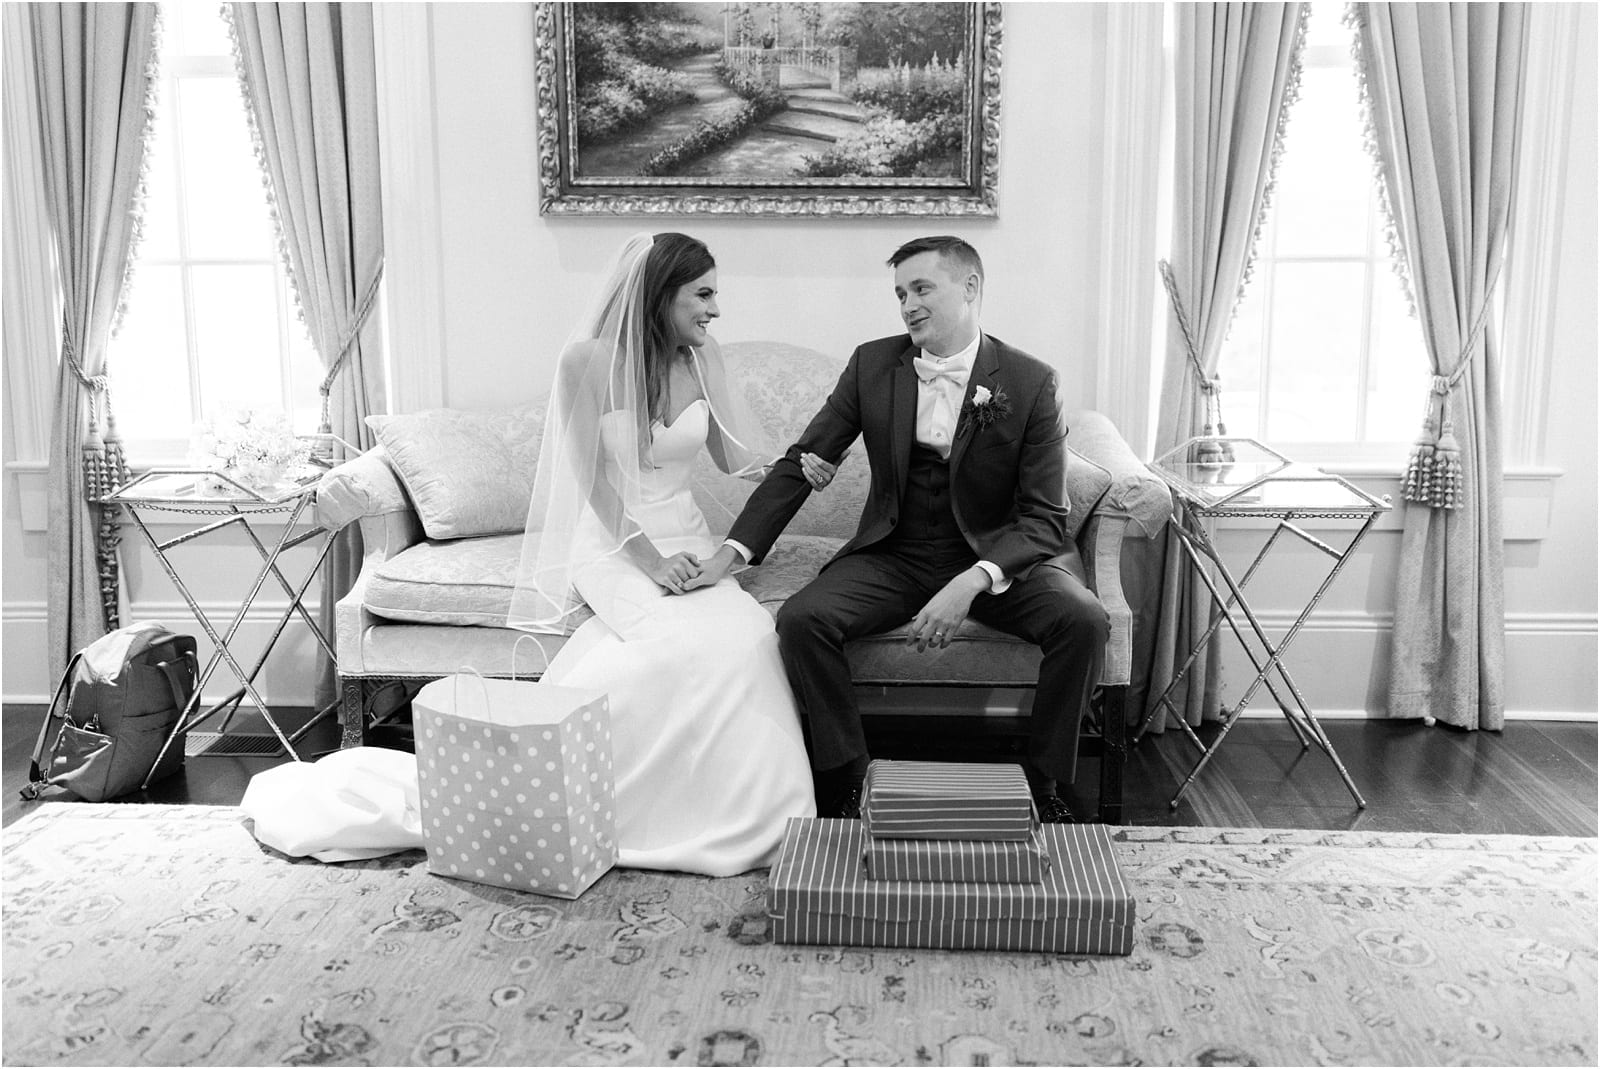 black and white image of bride and groom, exchanging wedding gifts